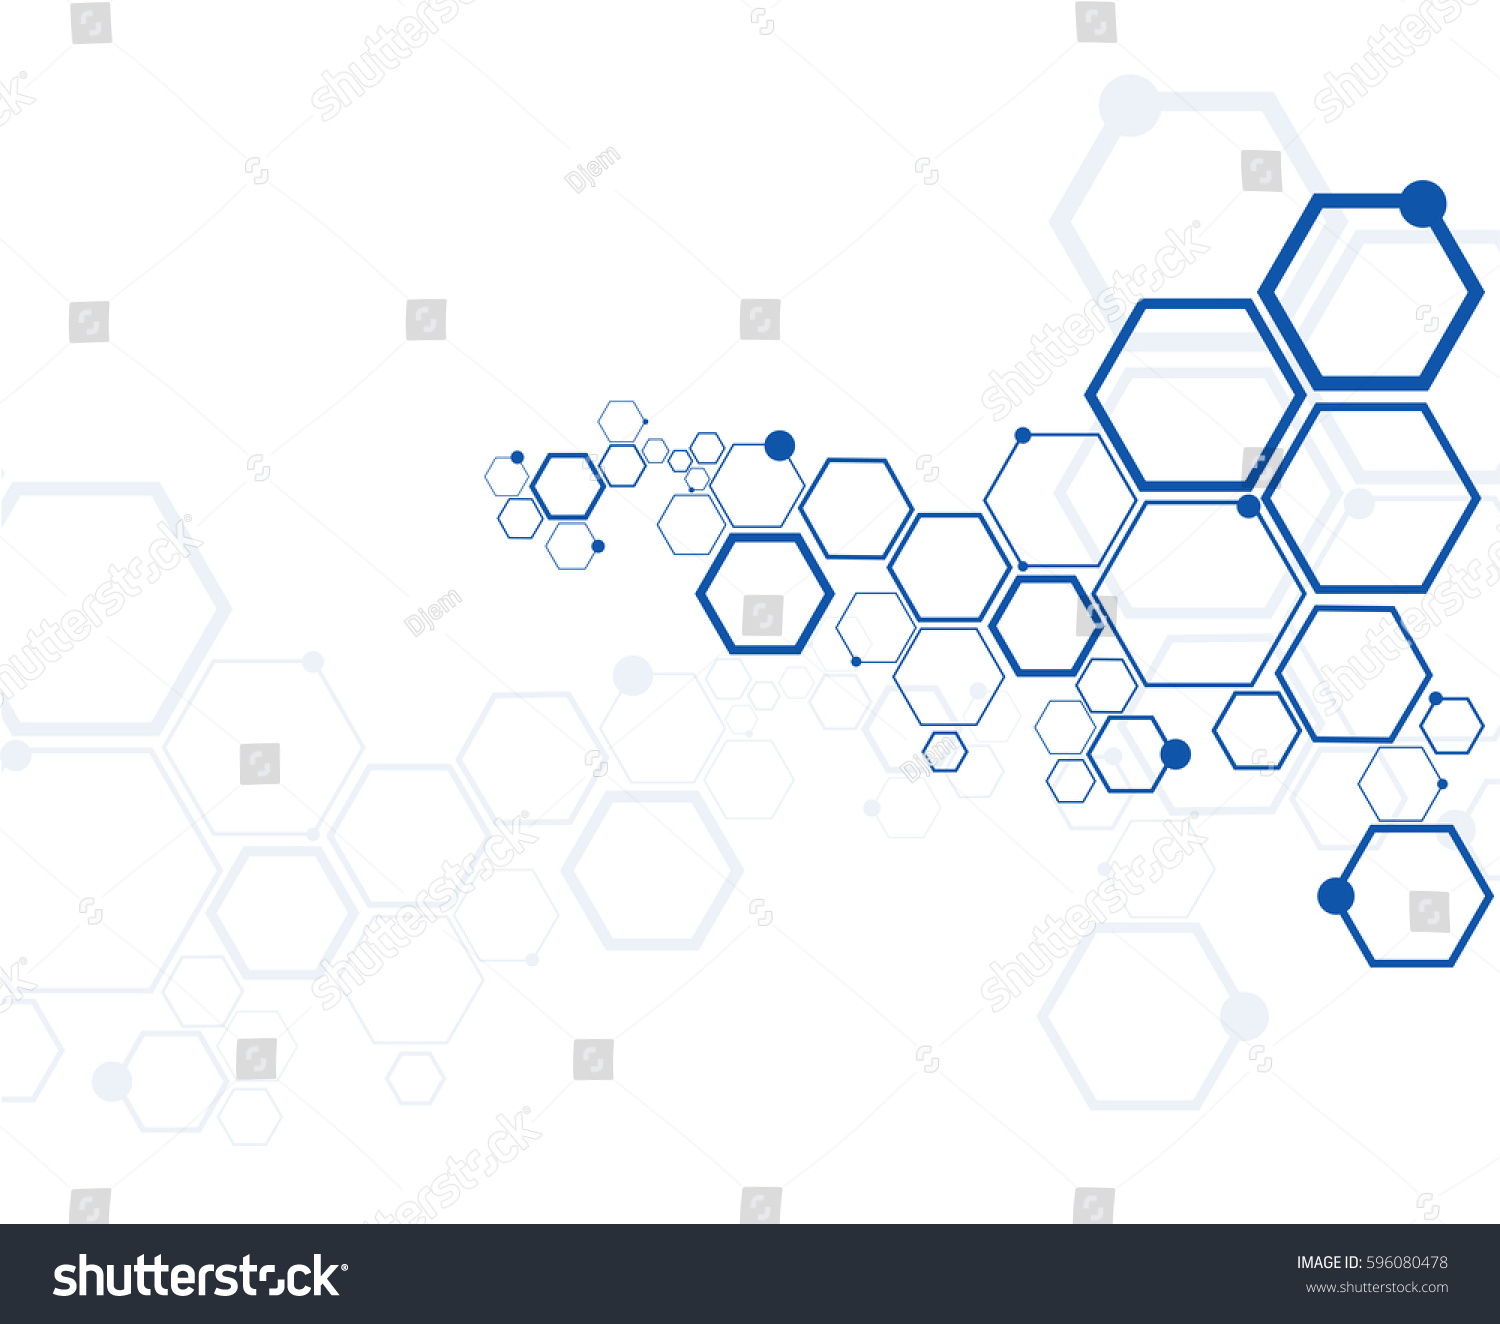 SVG of Abstract hexagonal structures in technology and science style. svg